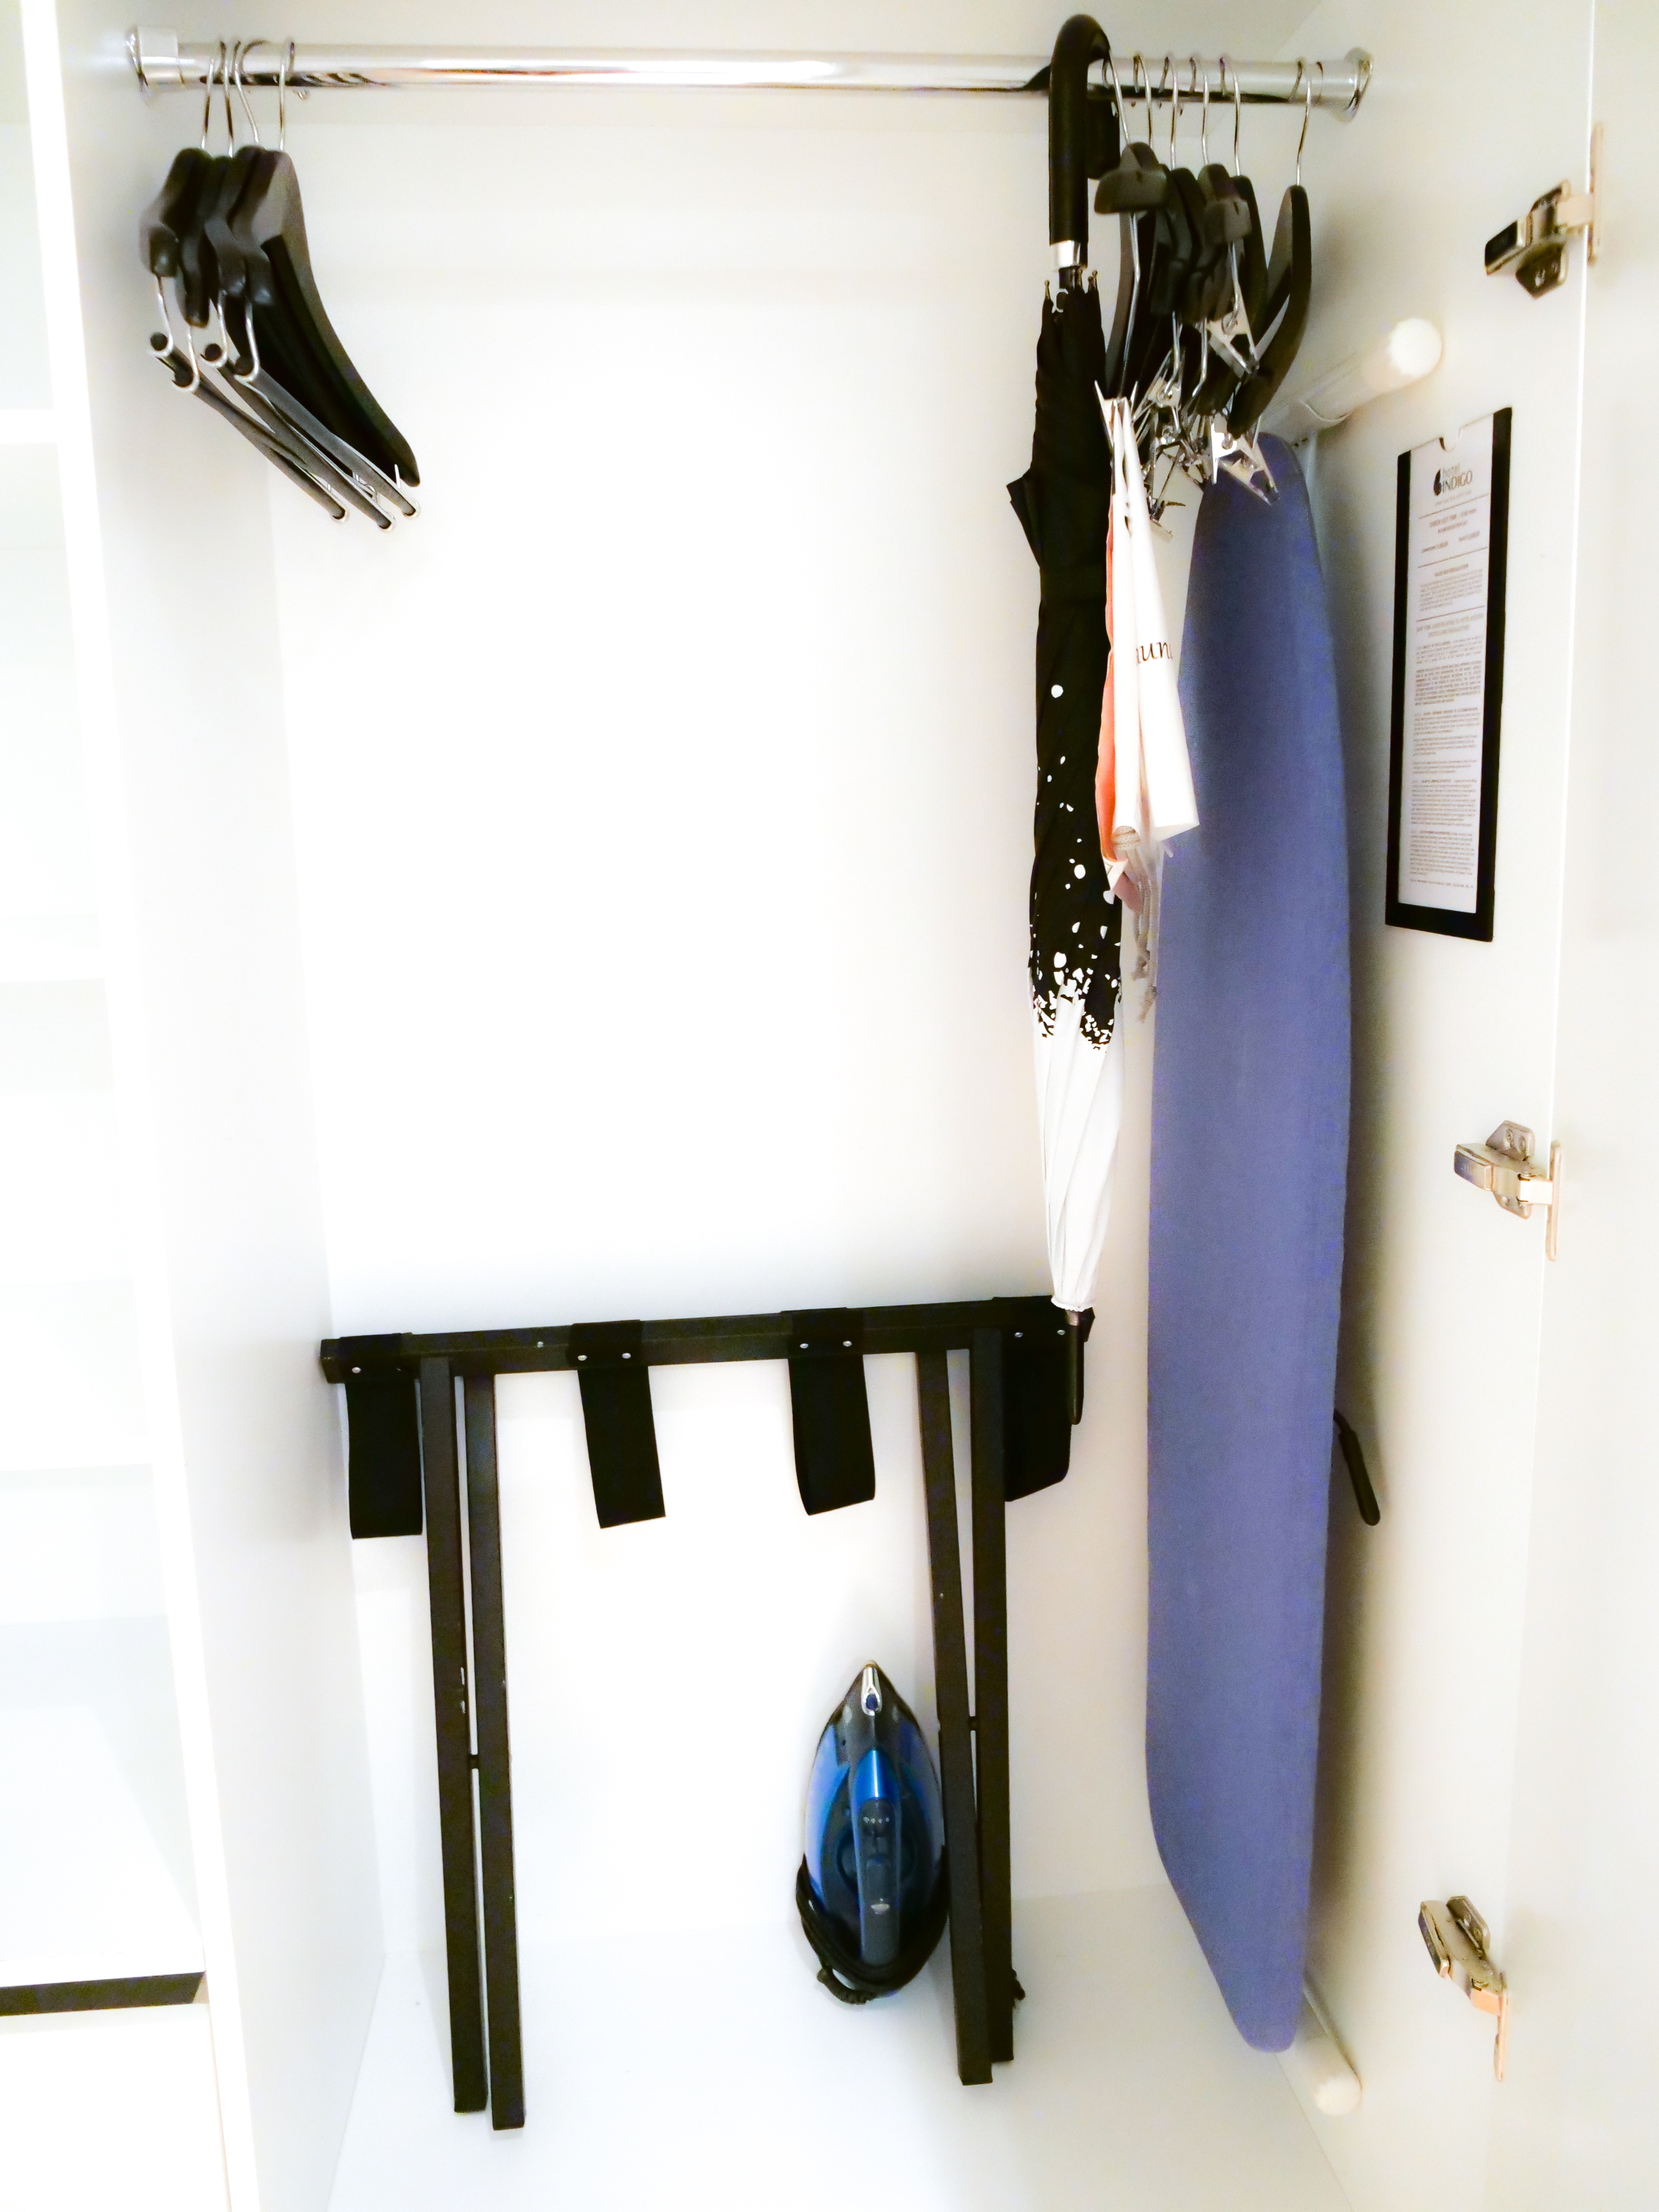 Hotel Indigo Lower East Side NYC Stay Review umbrella iron ironing board hangers closet